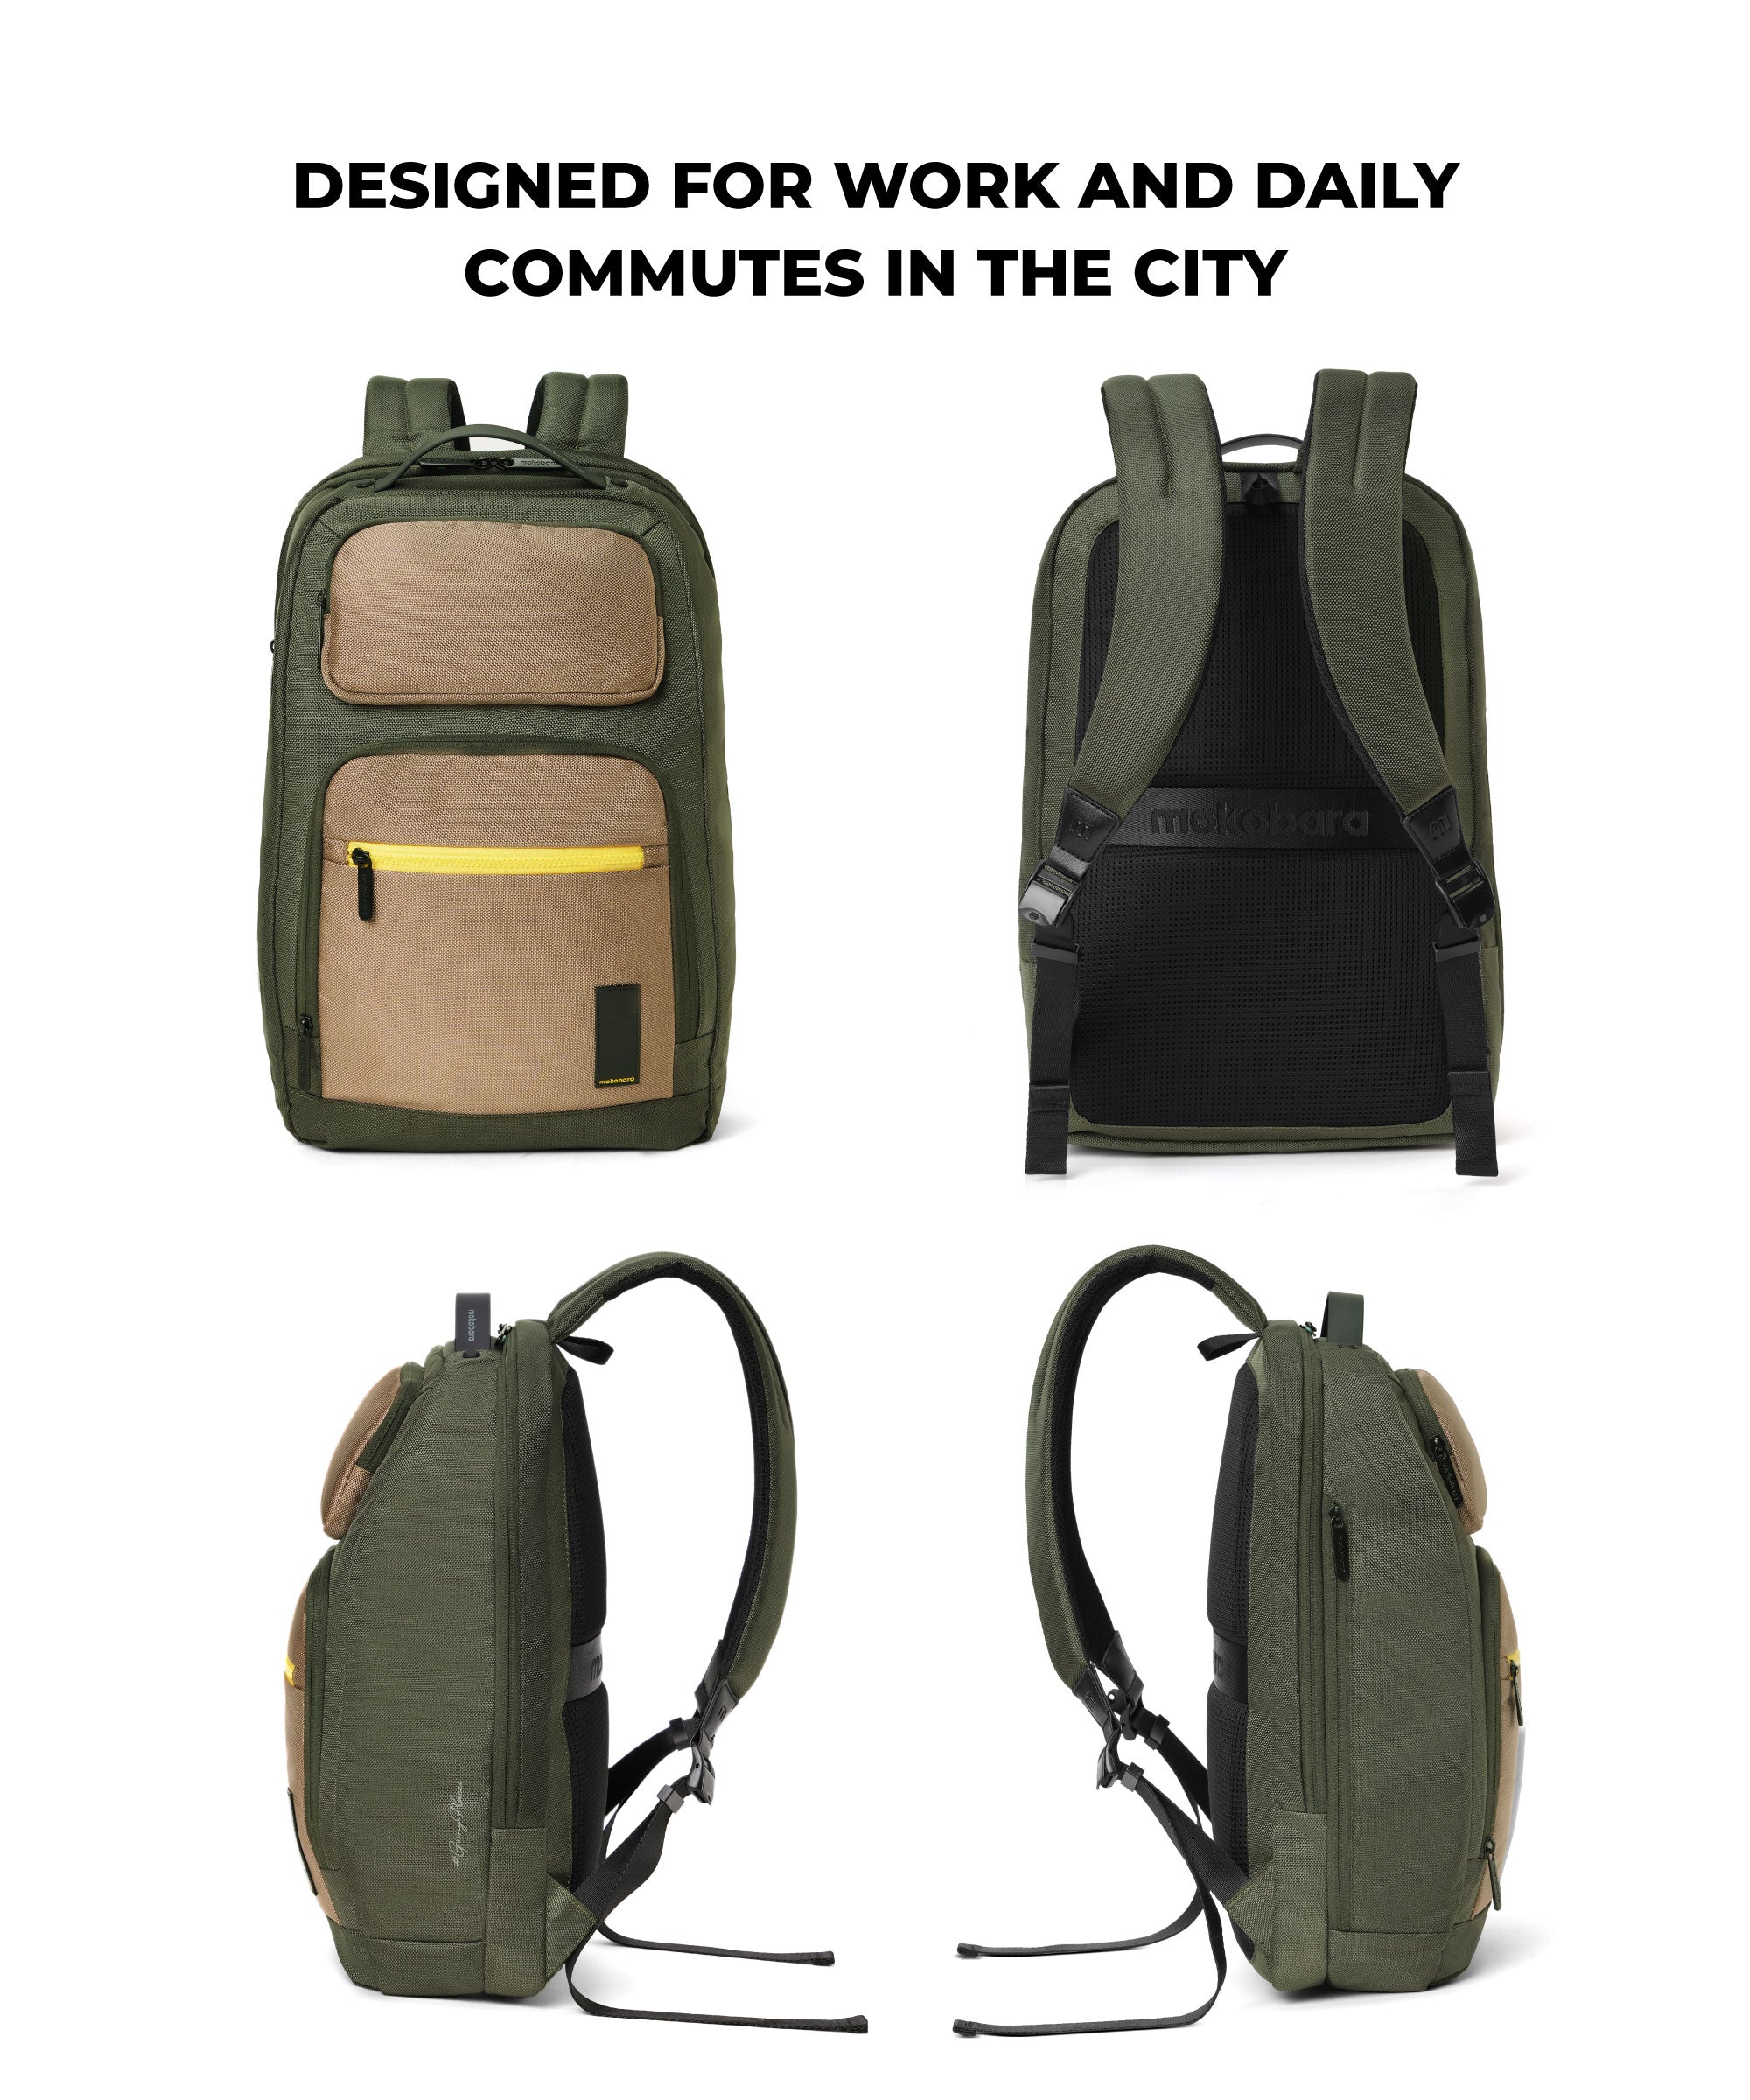 Color_Camouflage | The Cosmos Backpack